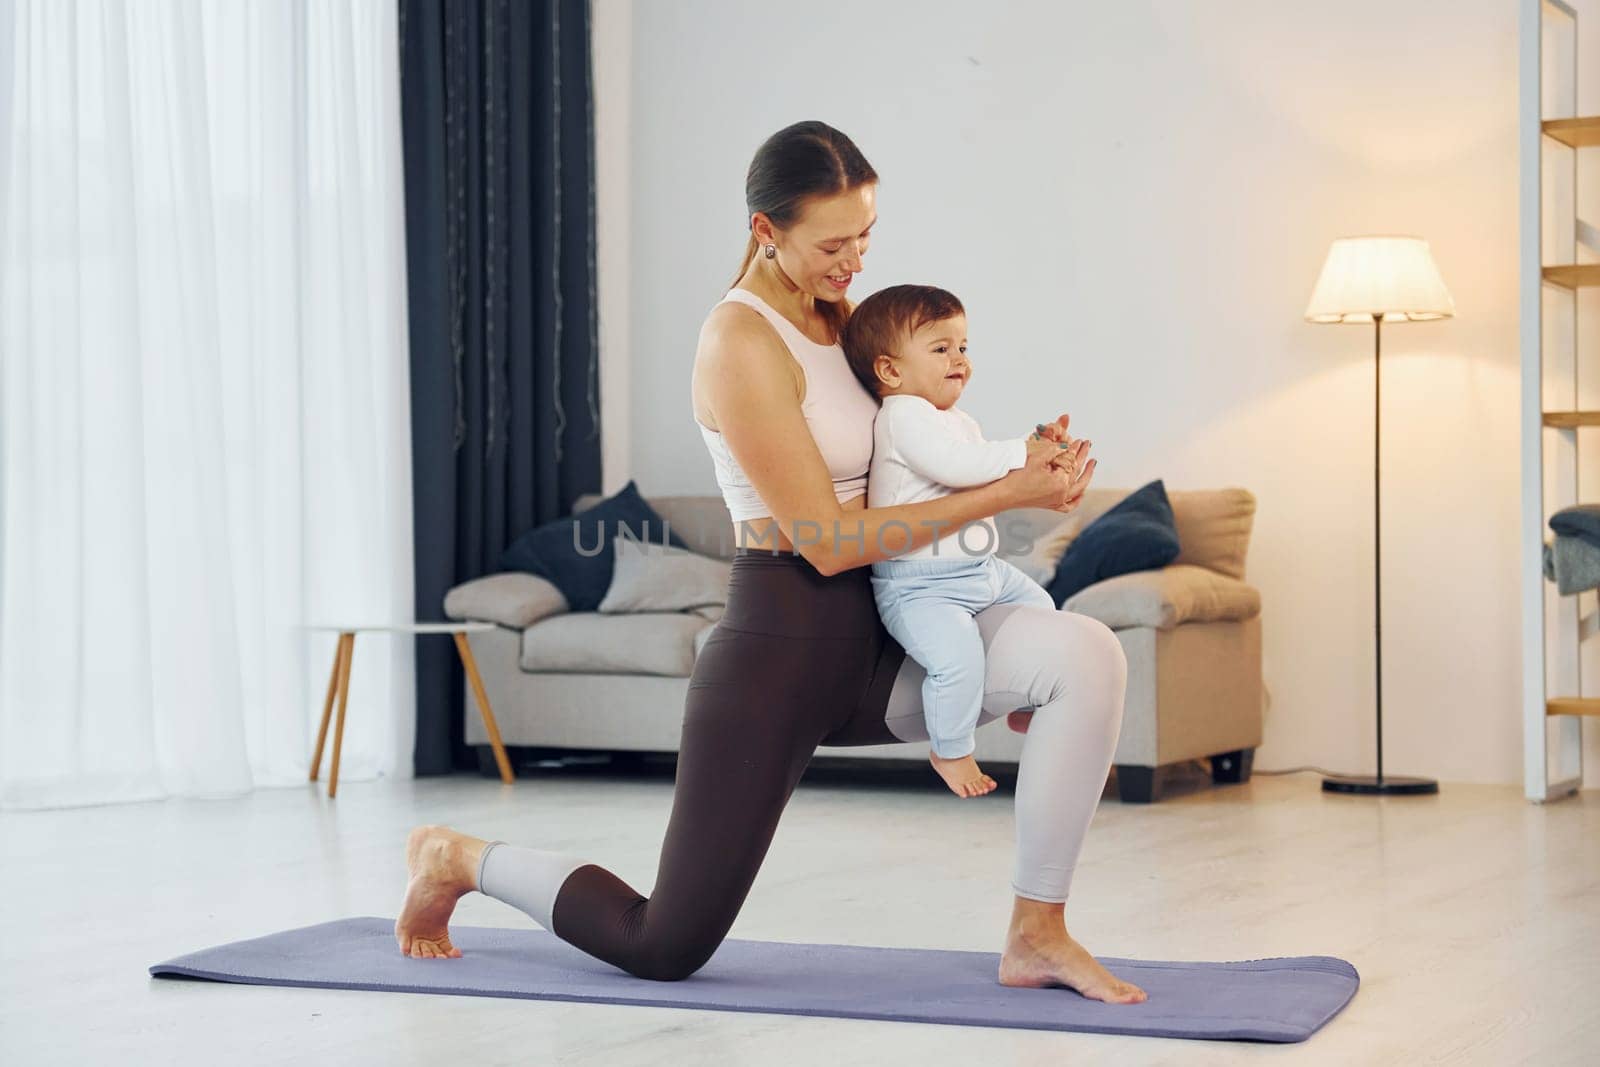 Standing on the mat and doing exerises. Mother with her little daughter is at home together by Standret